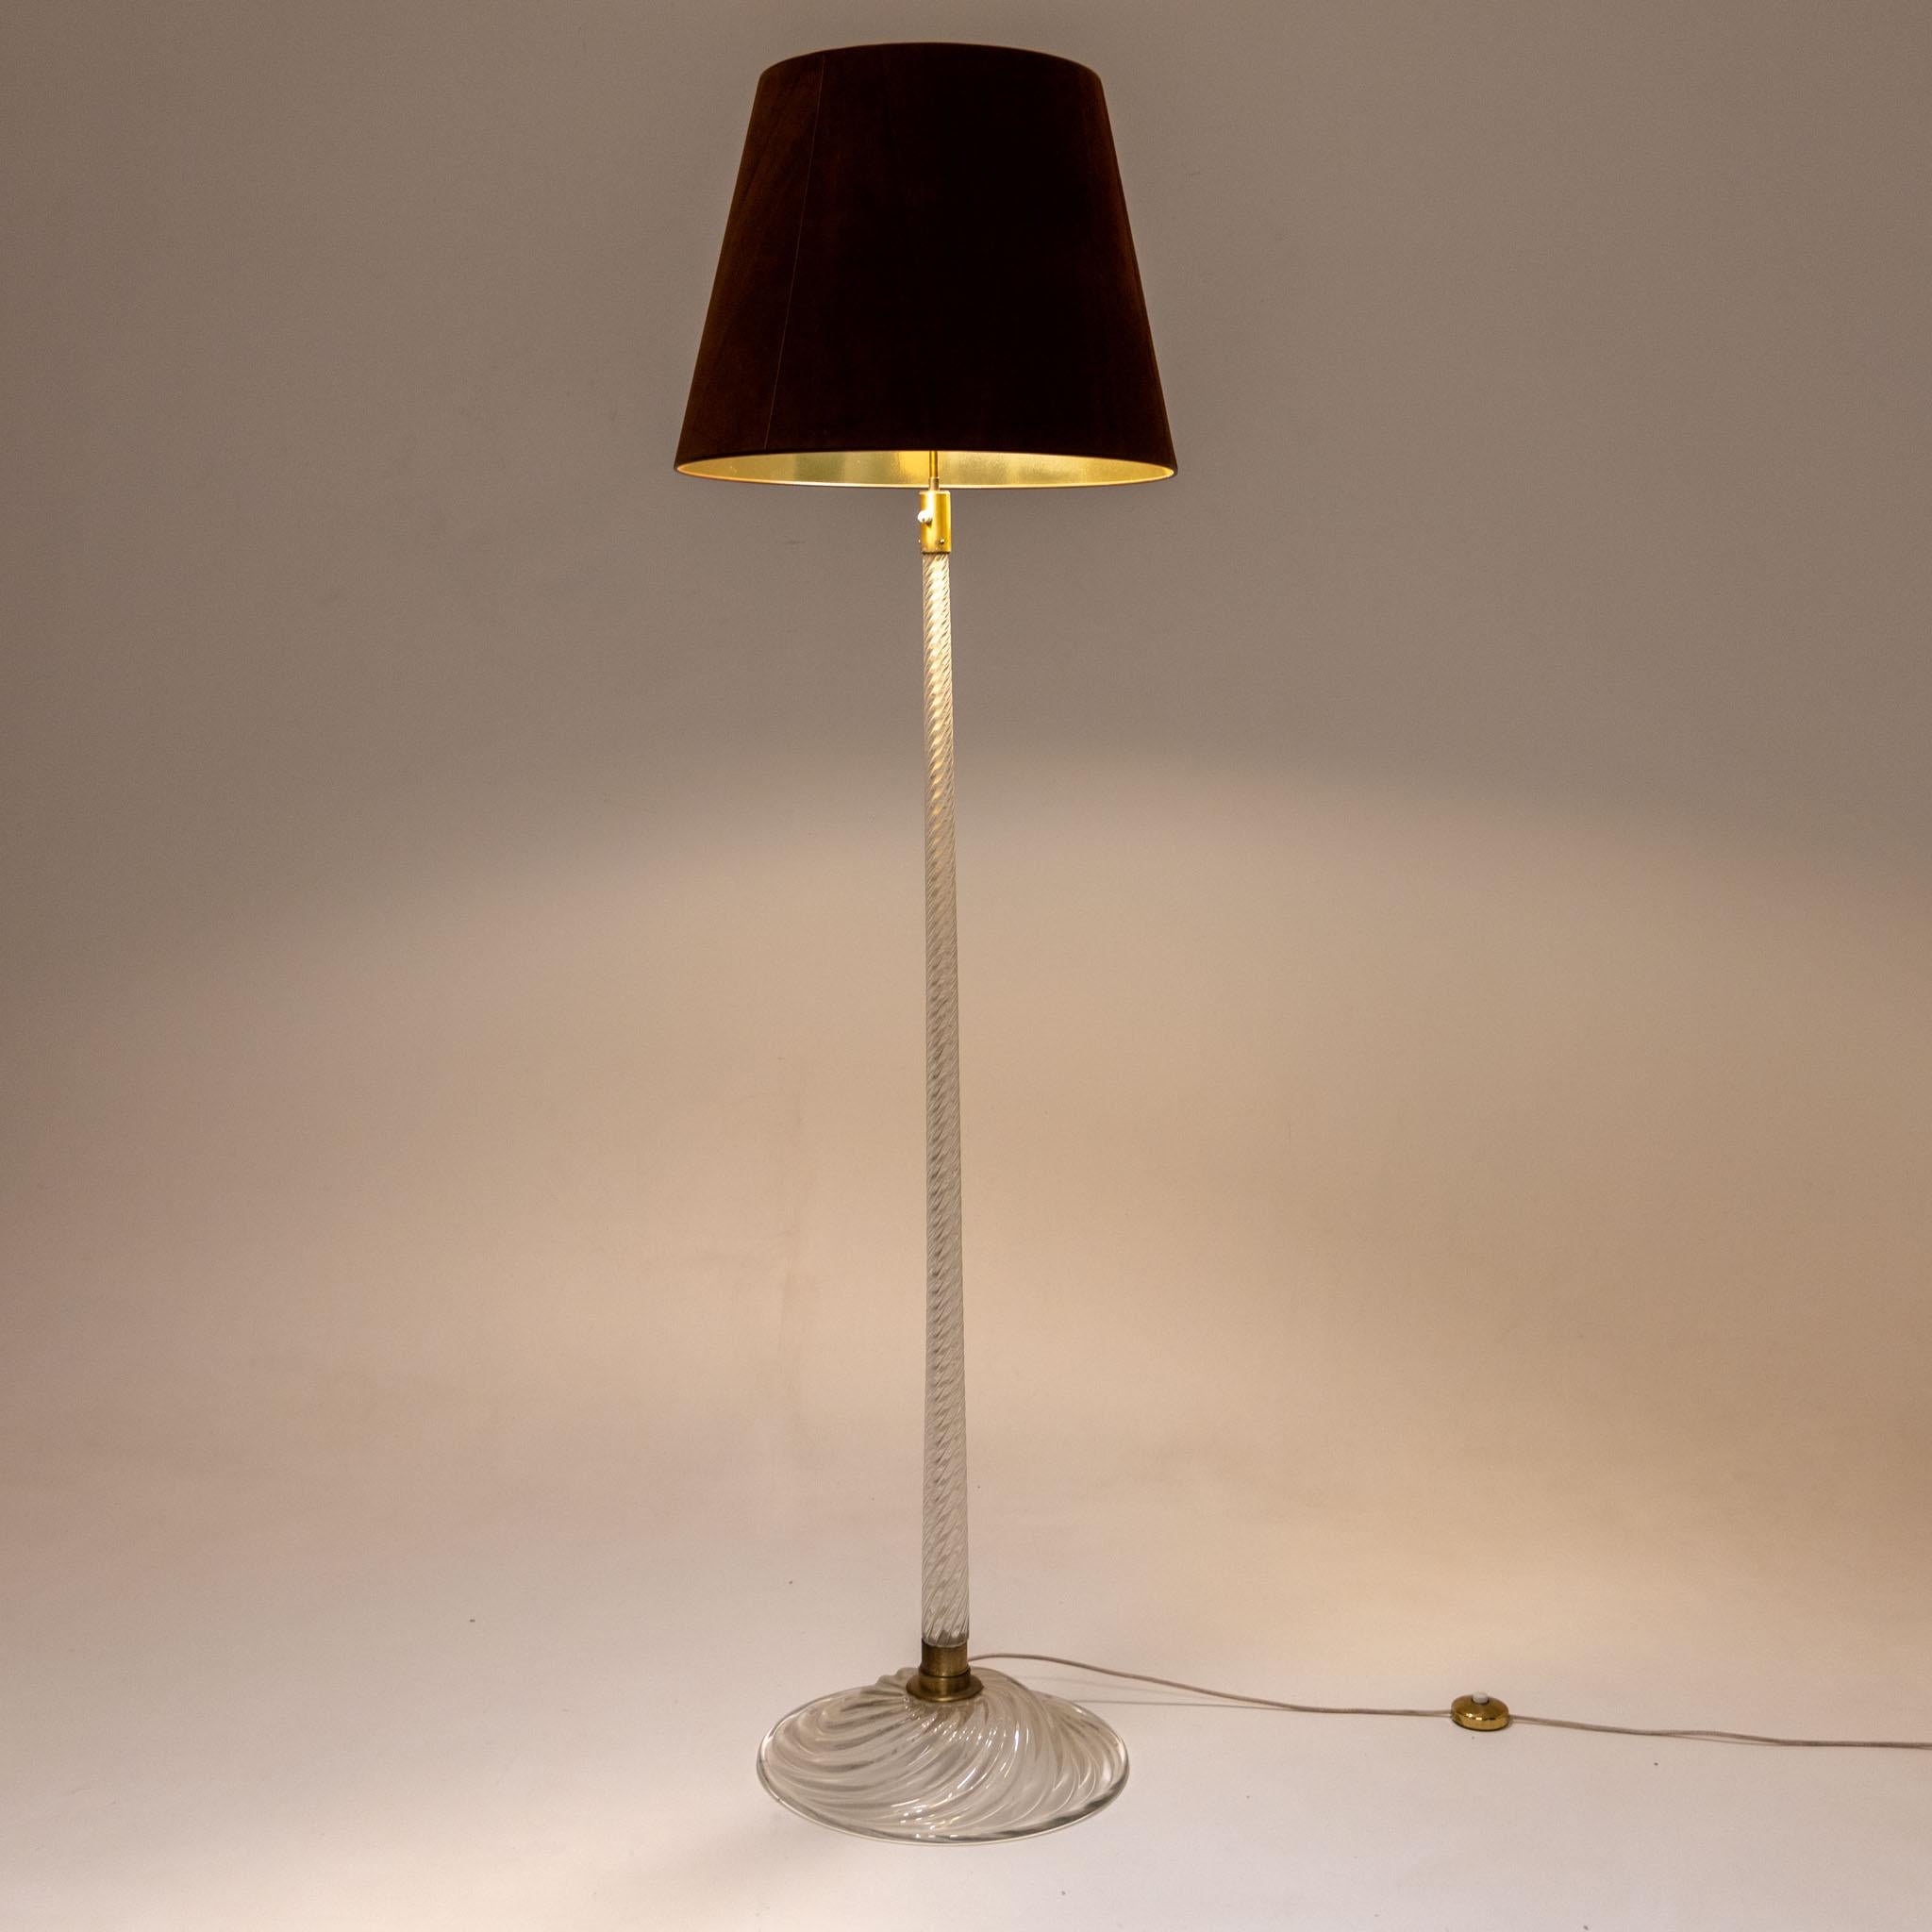 Murano Glass Floor Lamp with Suede Shade by Carlo Scarpa for Venini, Italy 1940s 1